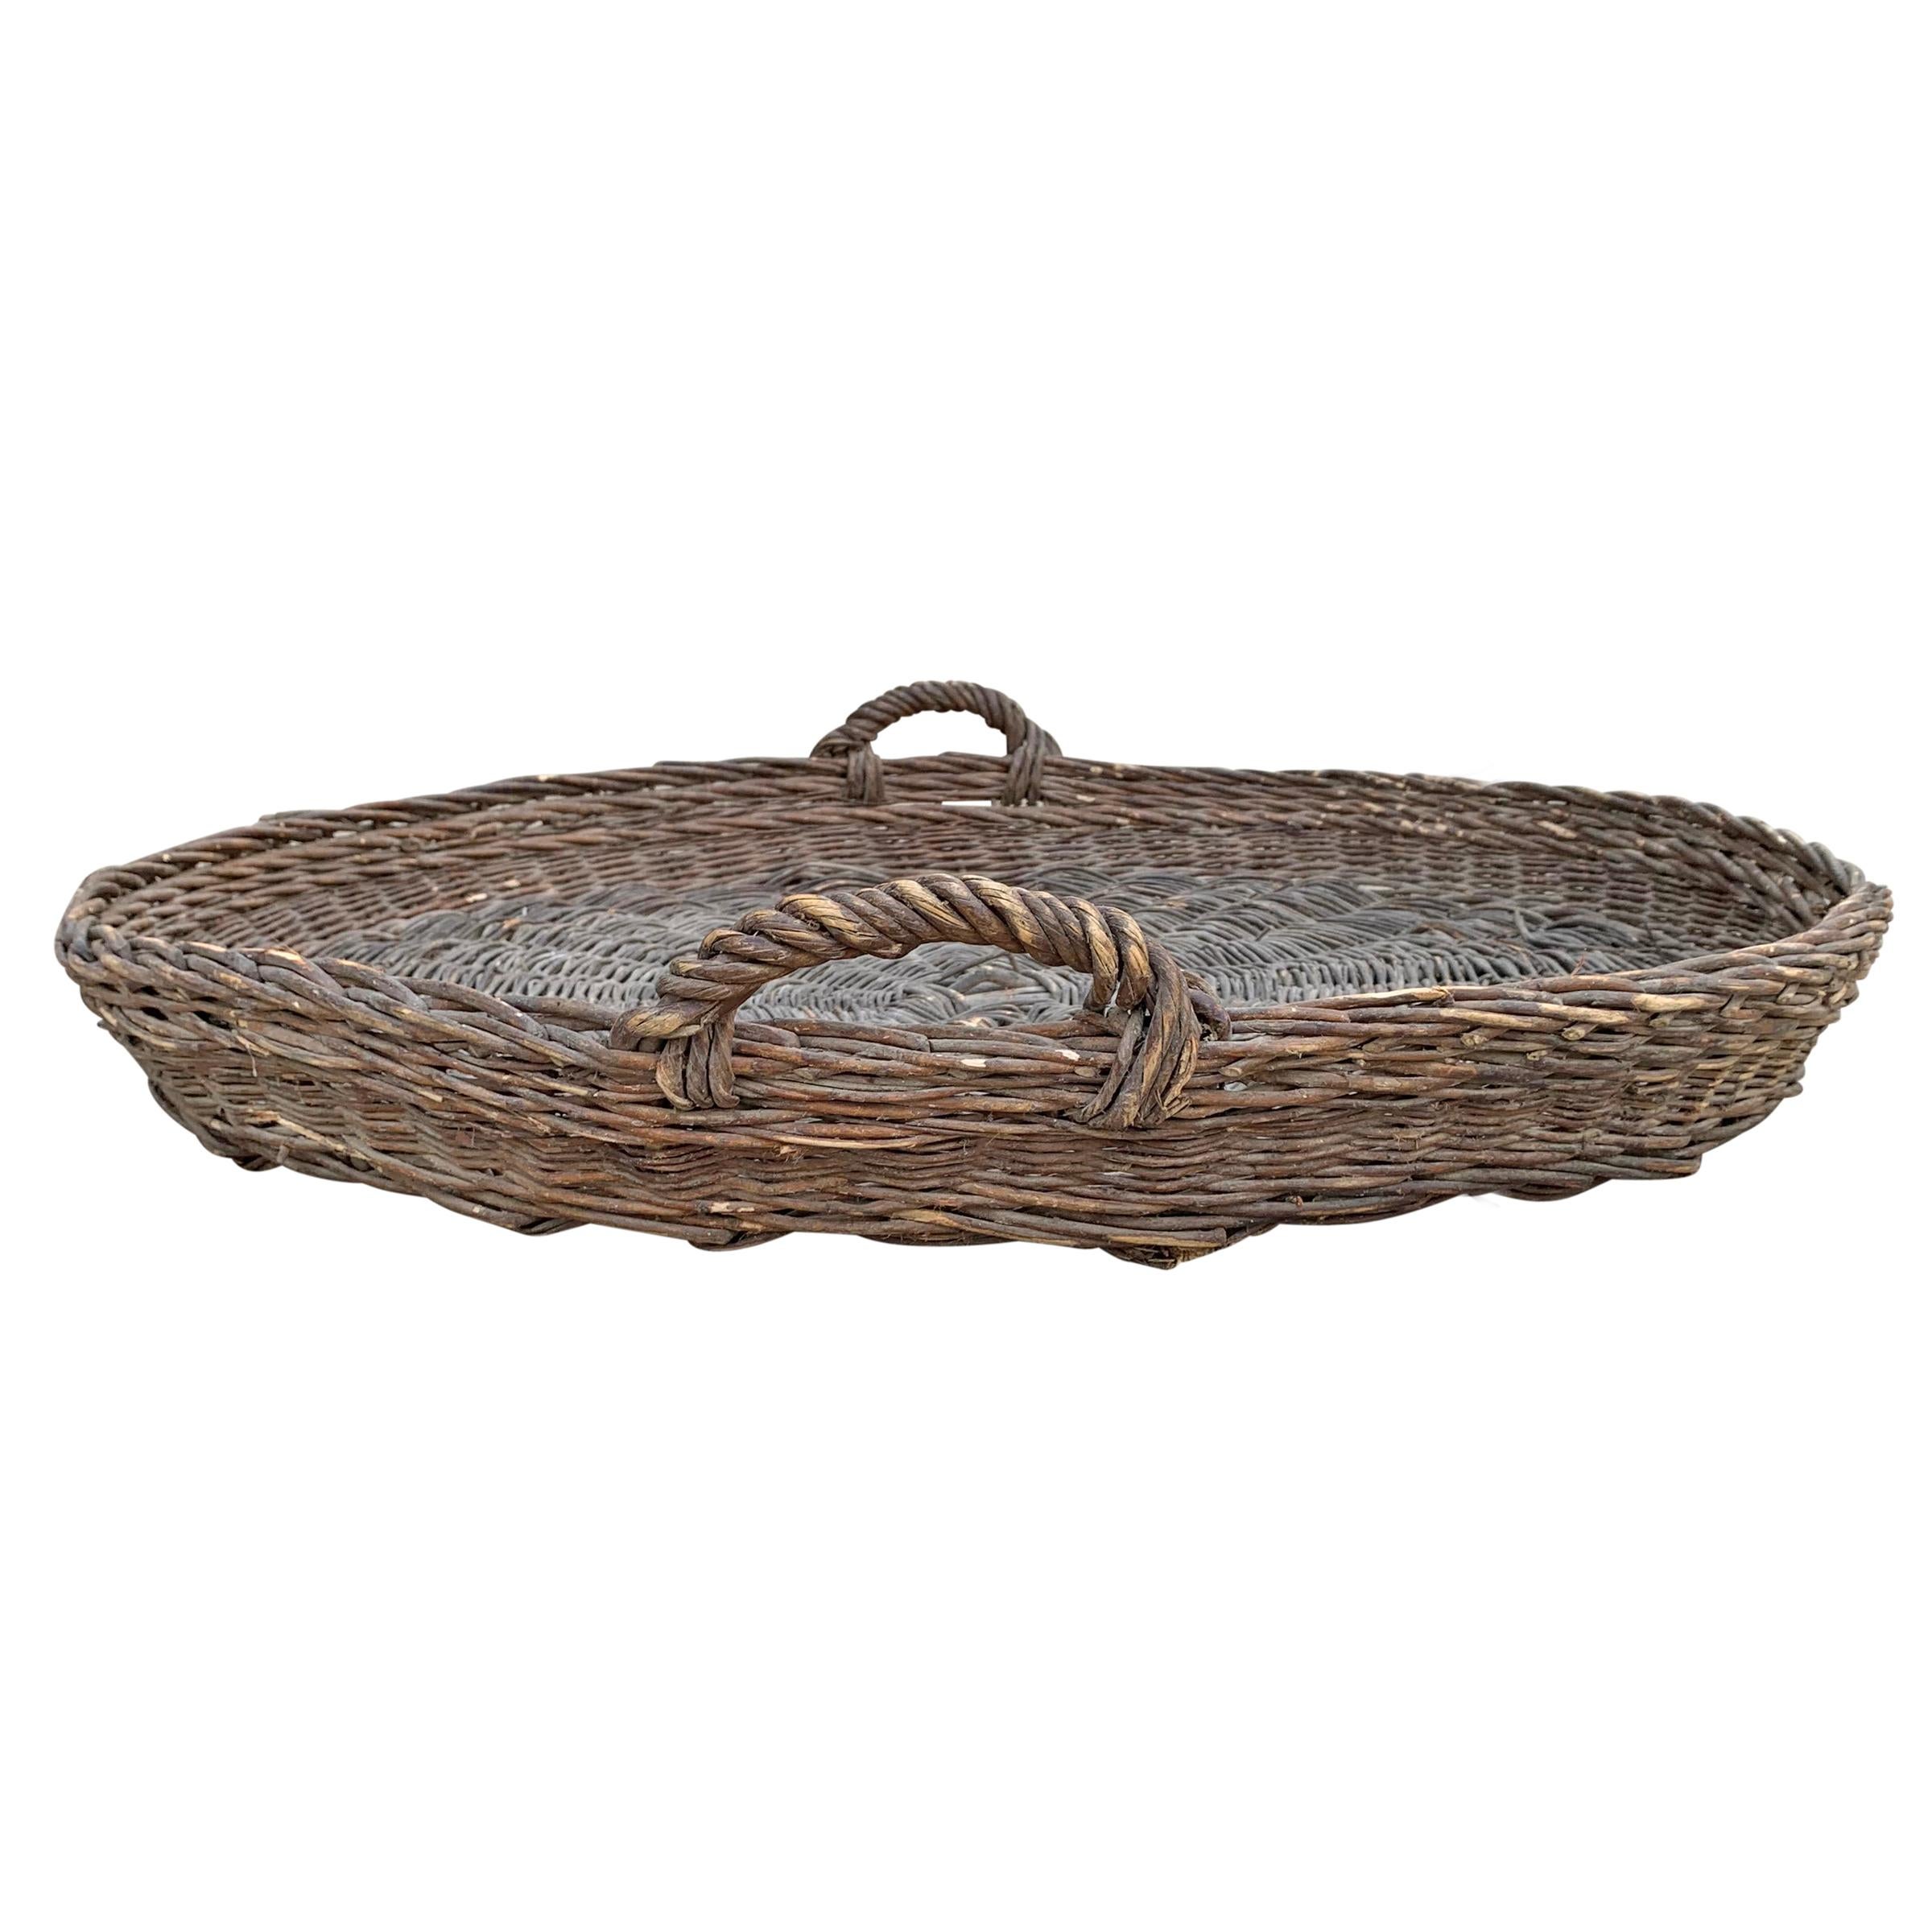 An early 20th century French handwoven willow winnowing basket with two twisted loop handles and a wonderful patina. Winnowing, in its simplest form, involves throwing grains of wheat into the air so that the wind blows the lighter chaff away,